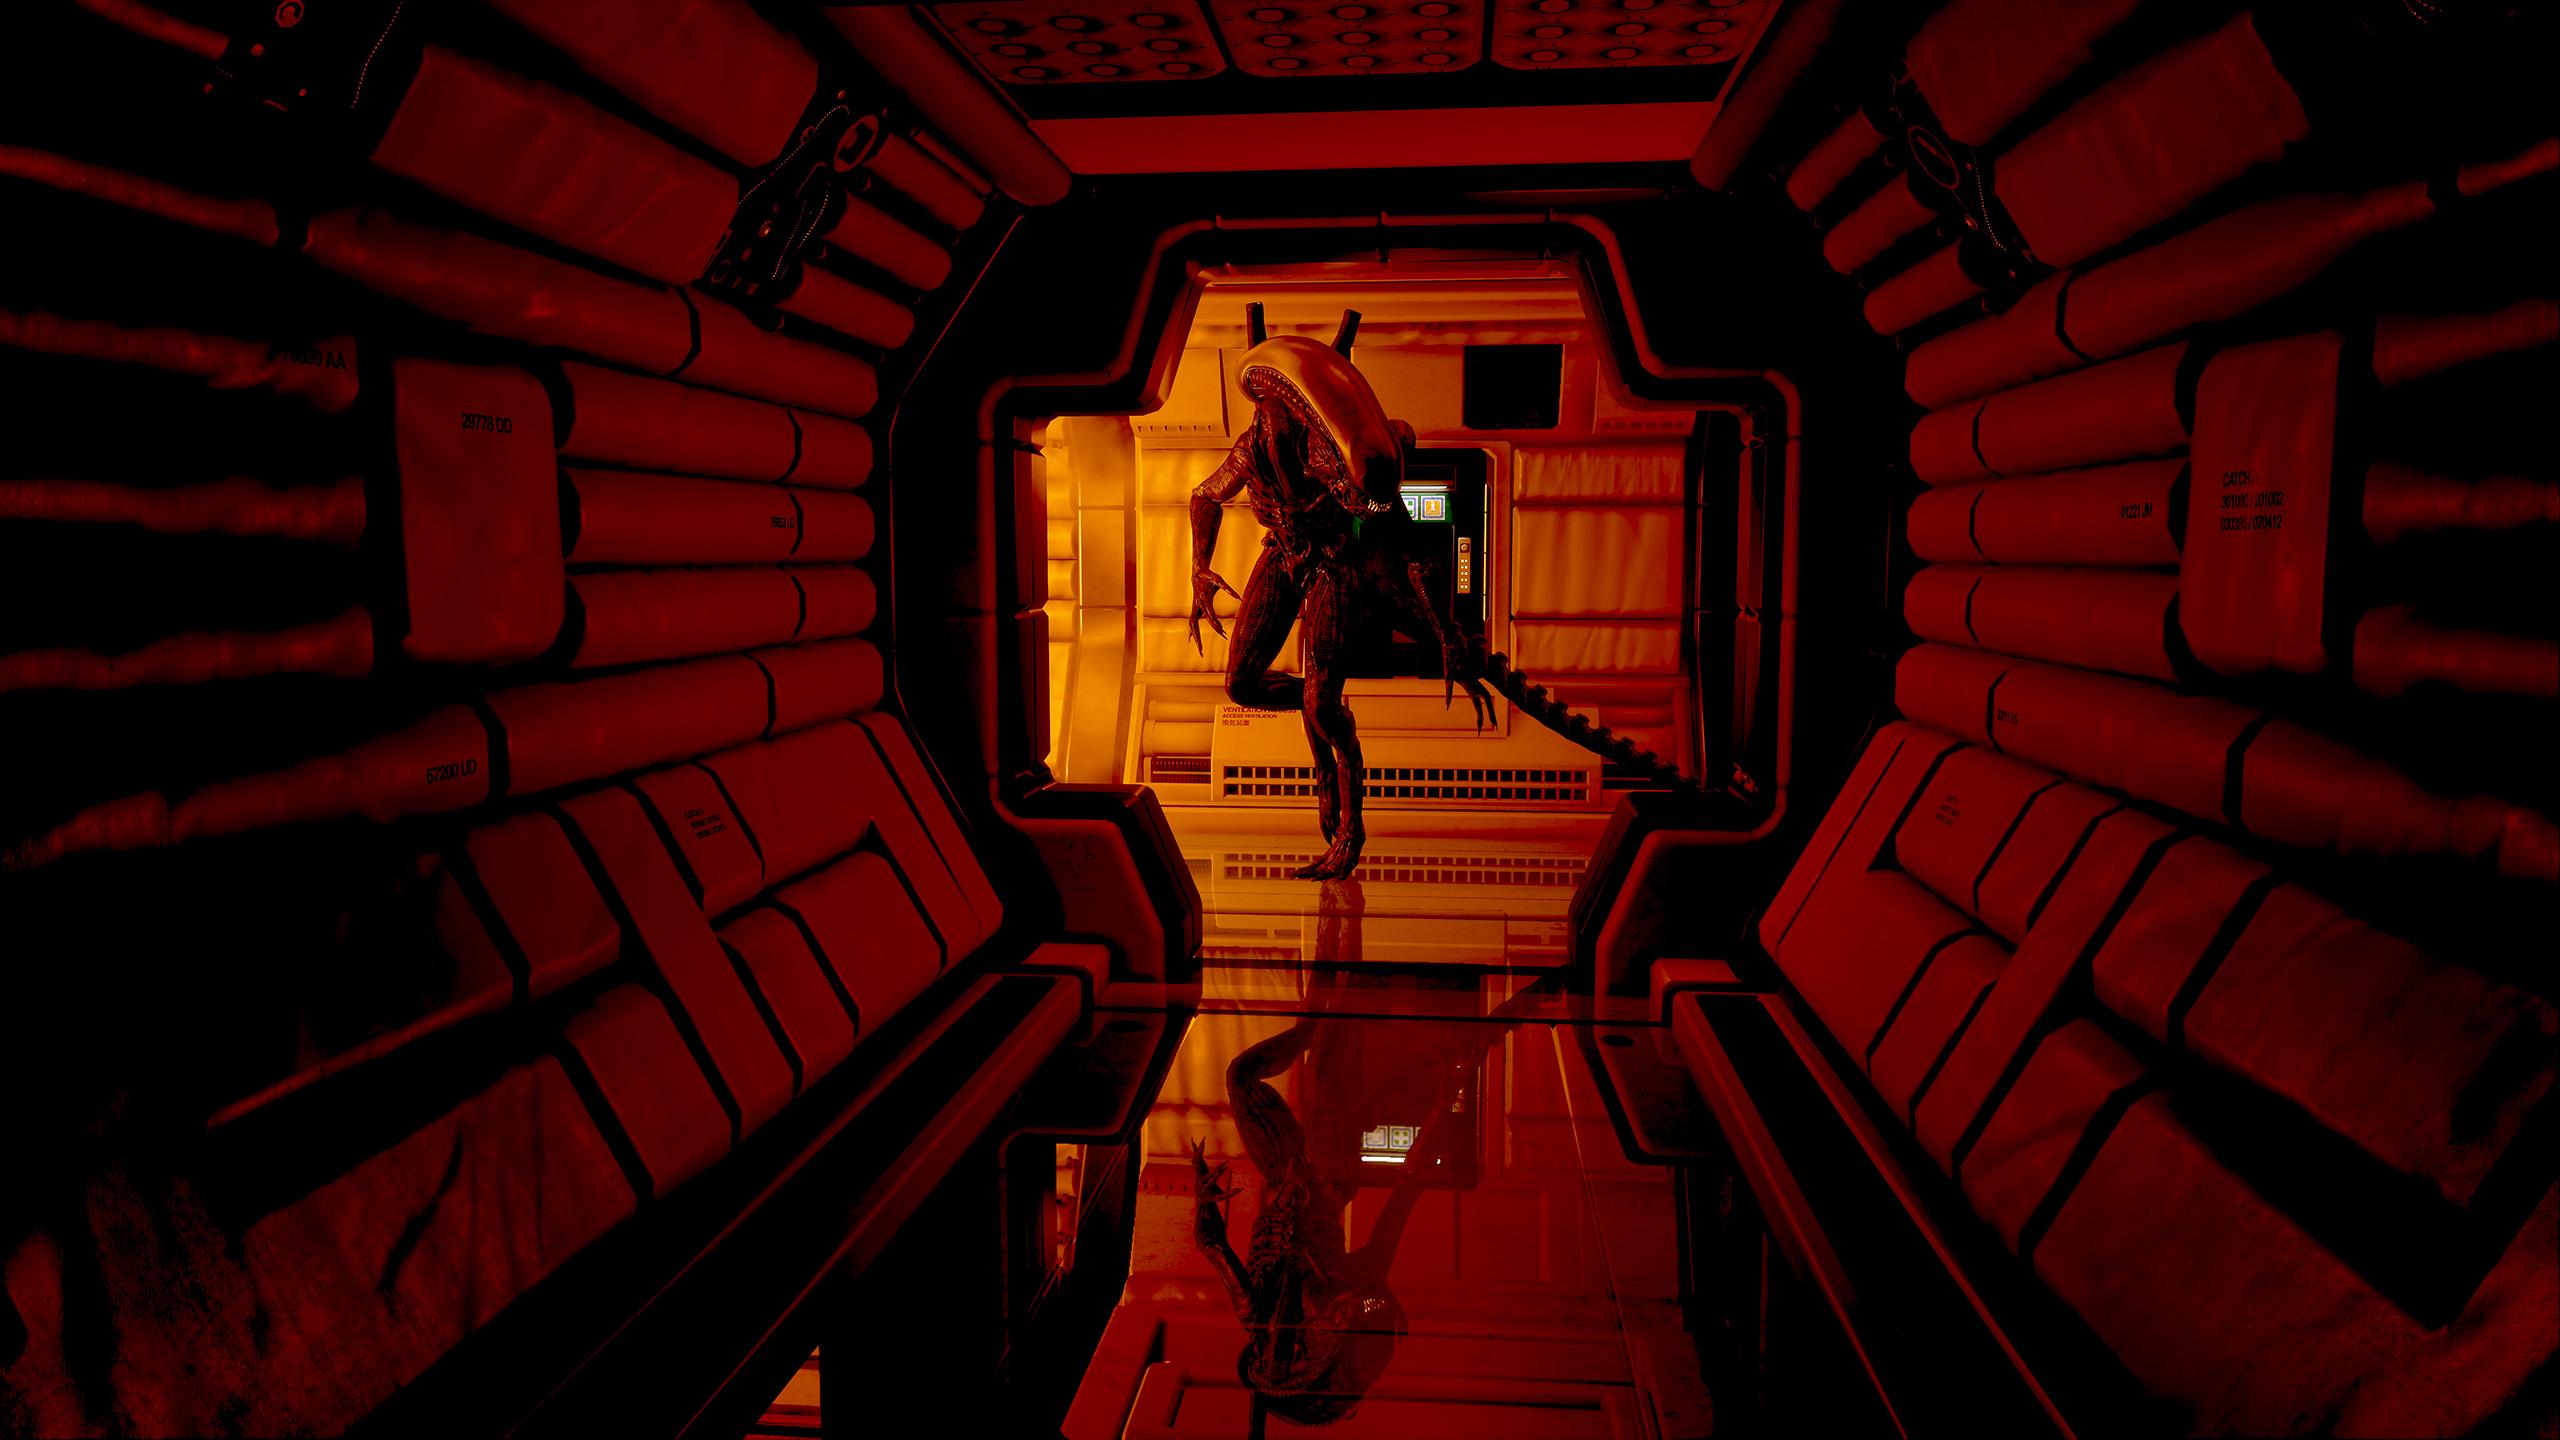 Final Alien: Isolation Trailer Goes Searching for Ripley